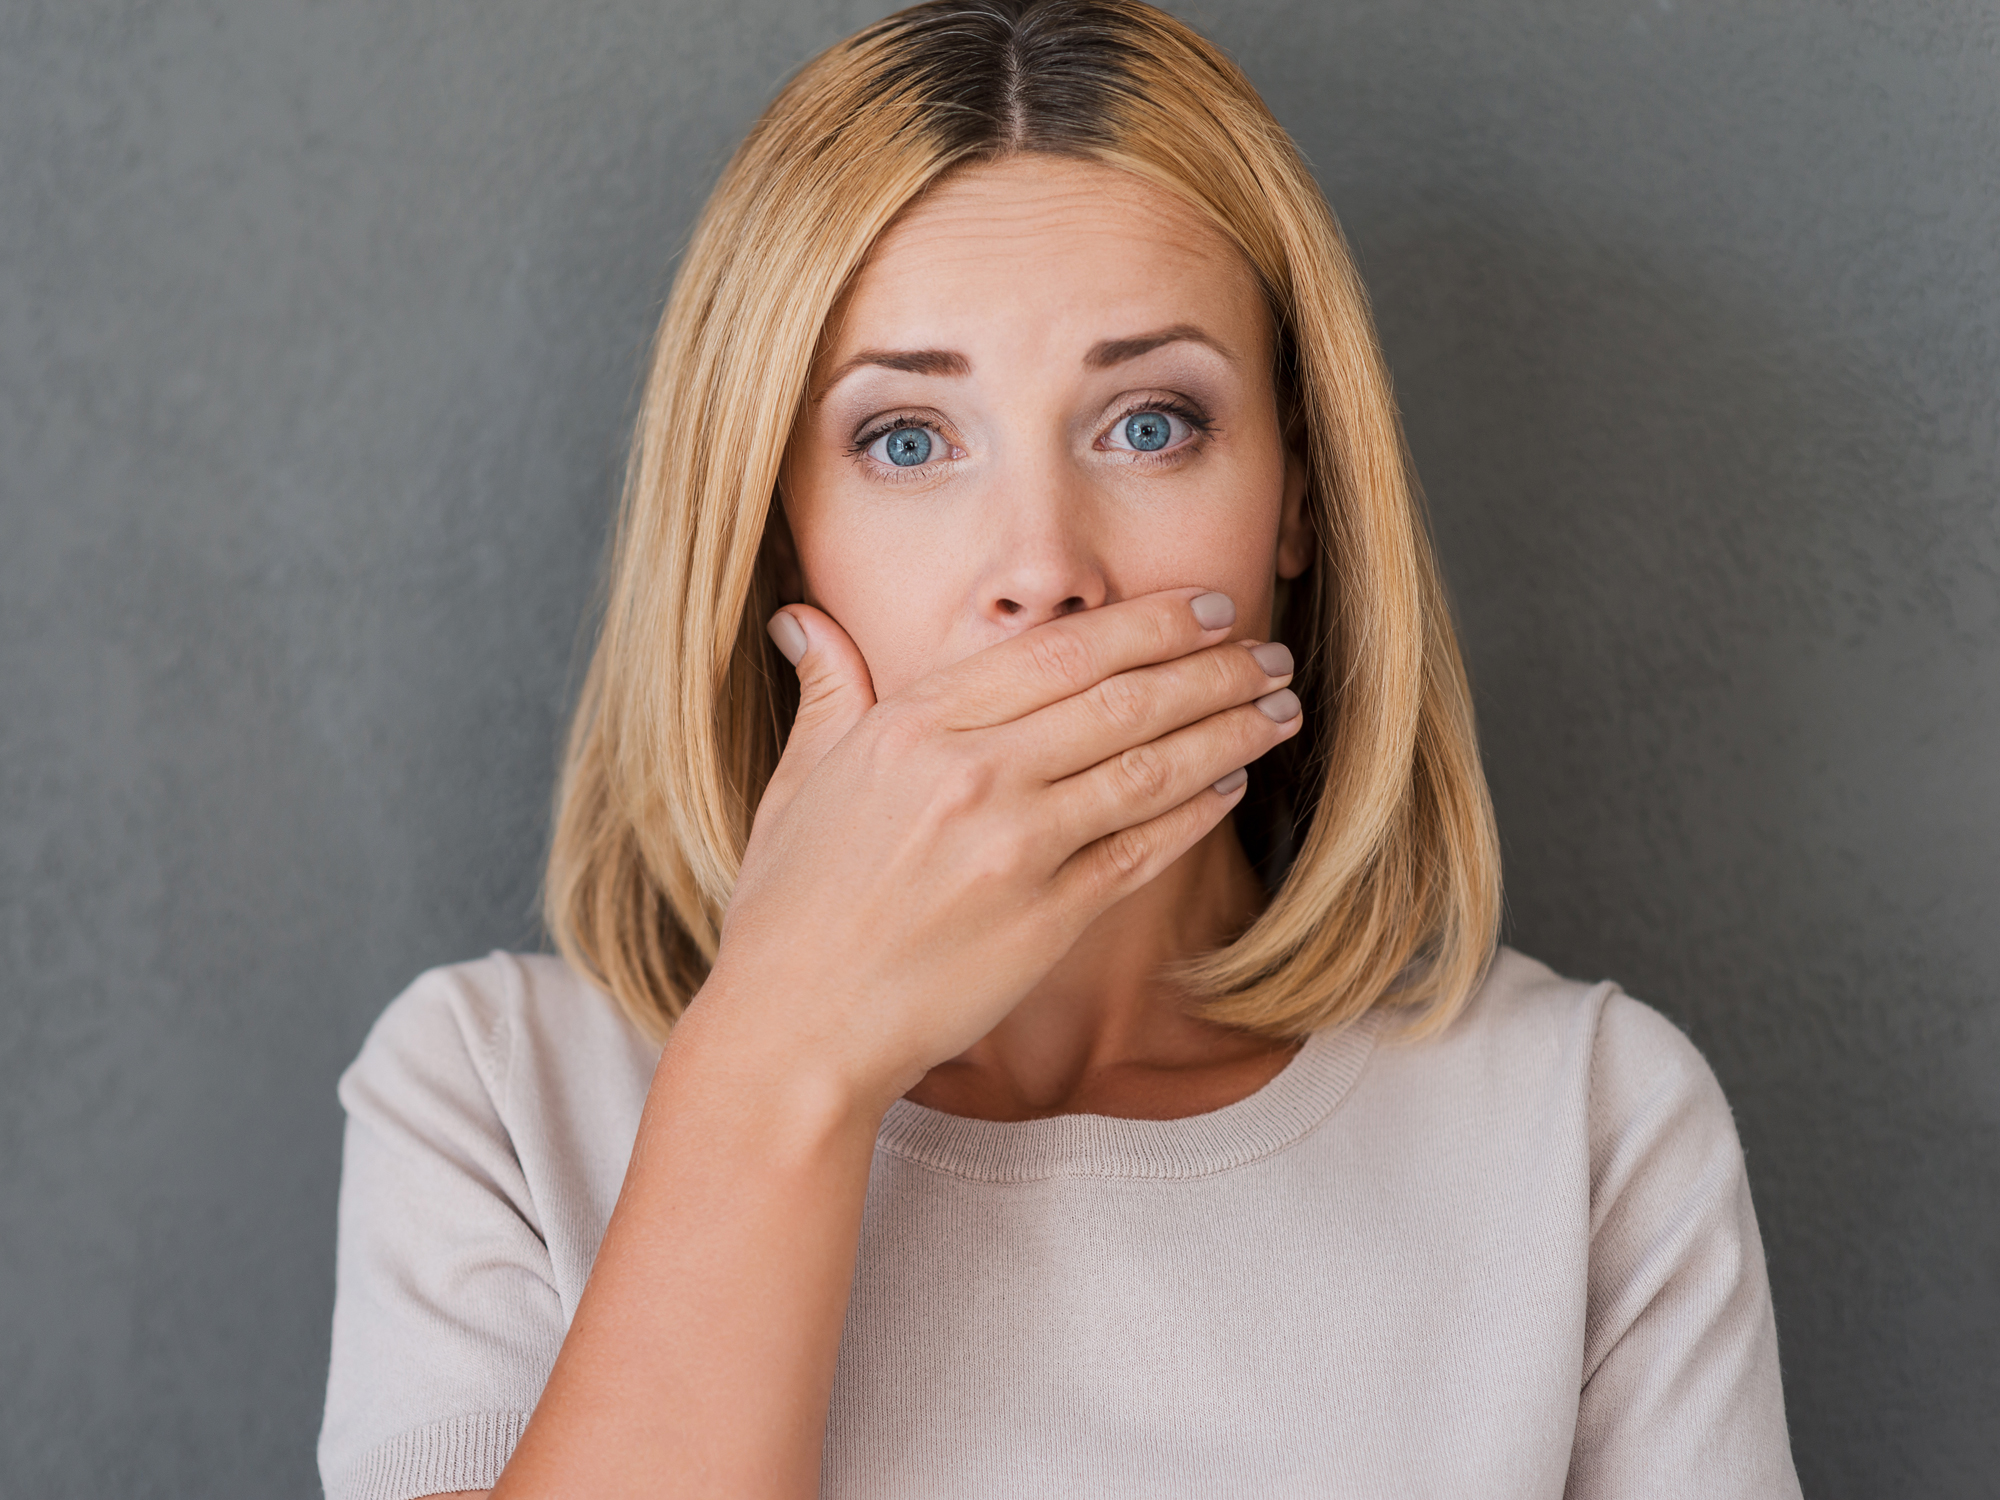 Is your bad breath trying to tell you something?